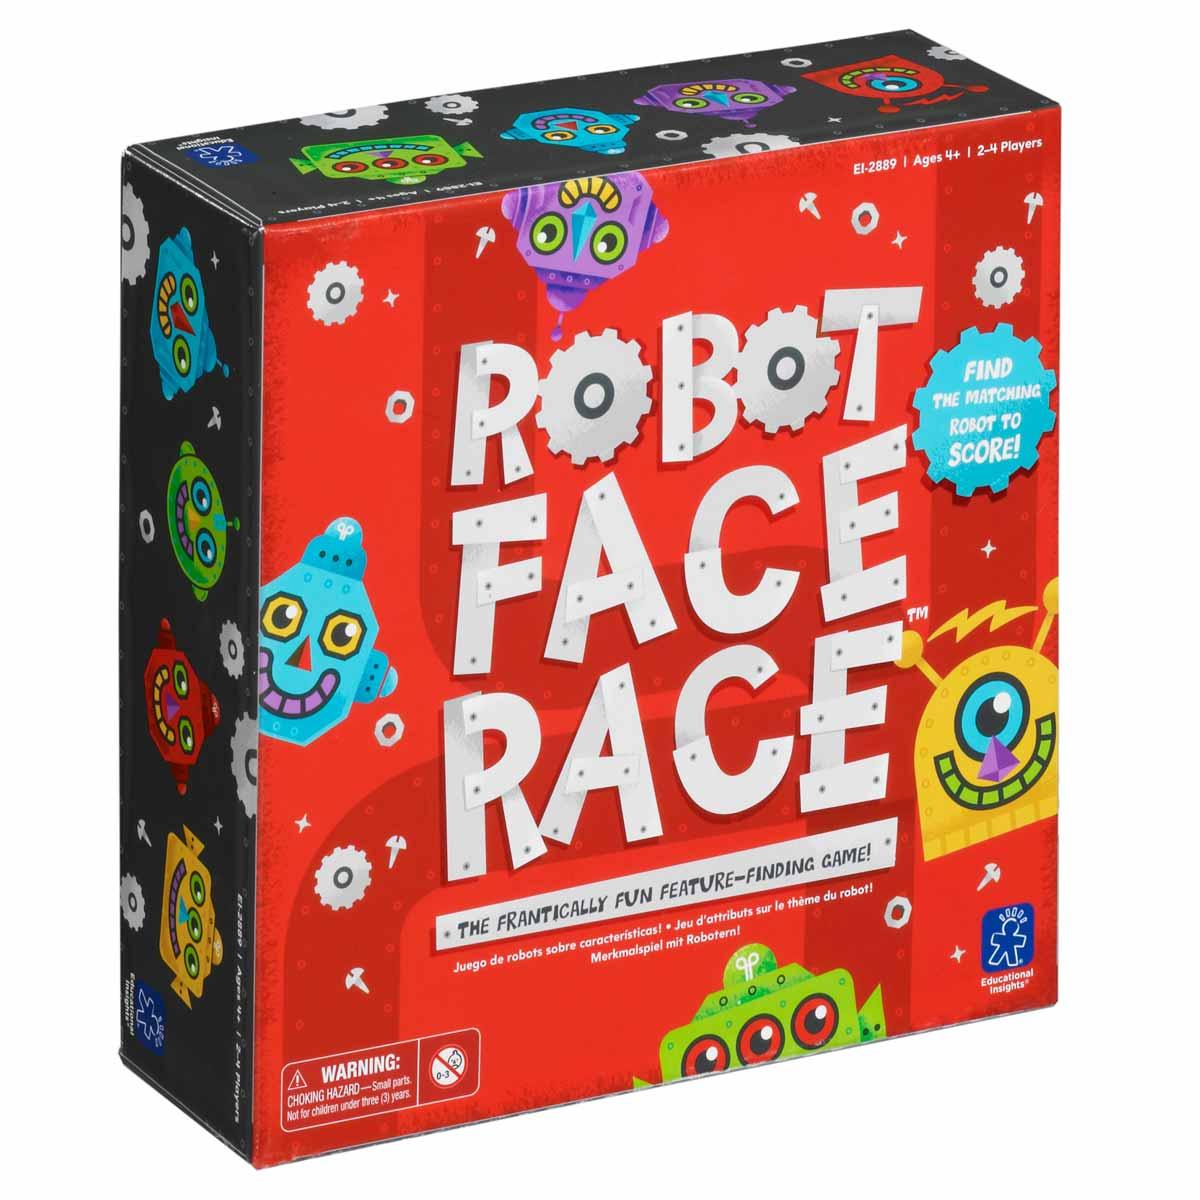 Robot Face Race™ - Ages 4 - 8 - MoonyBoon